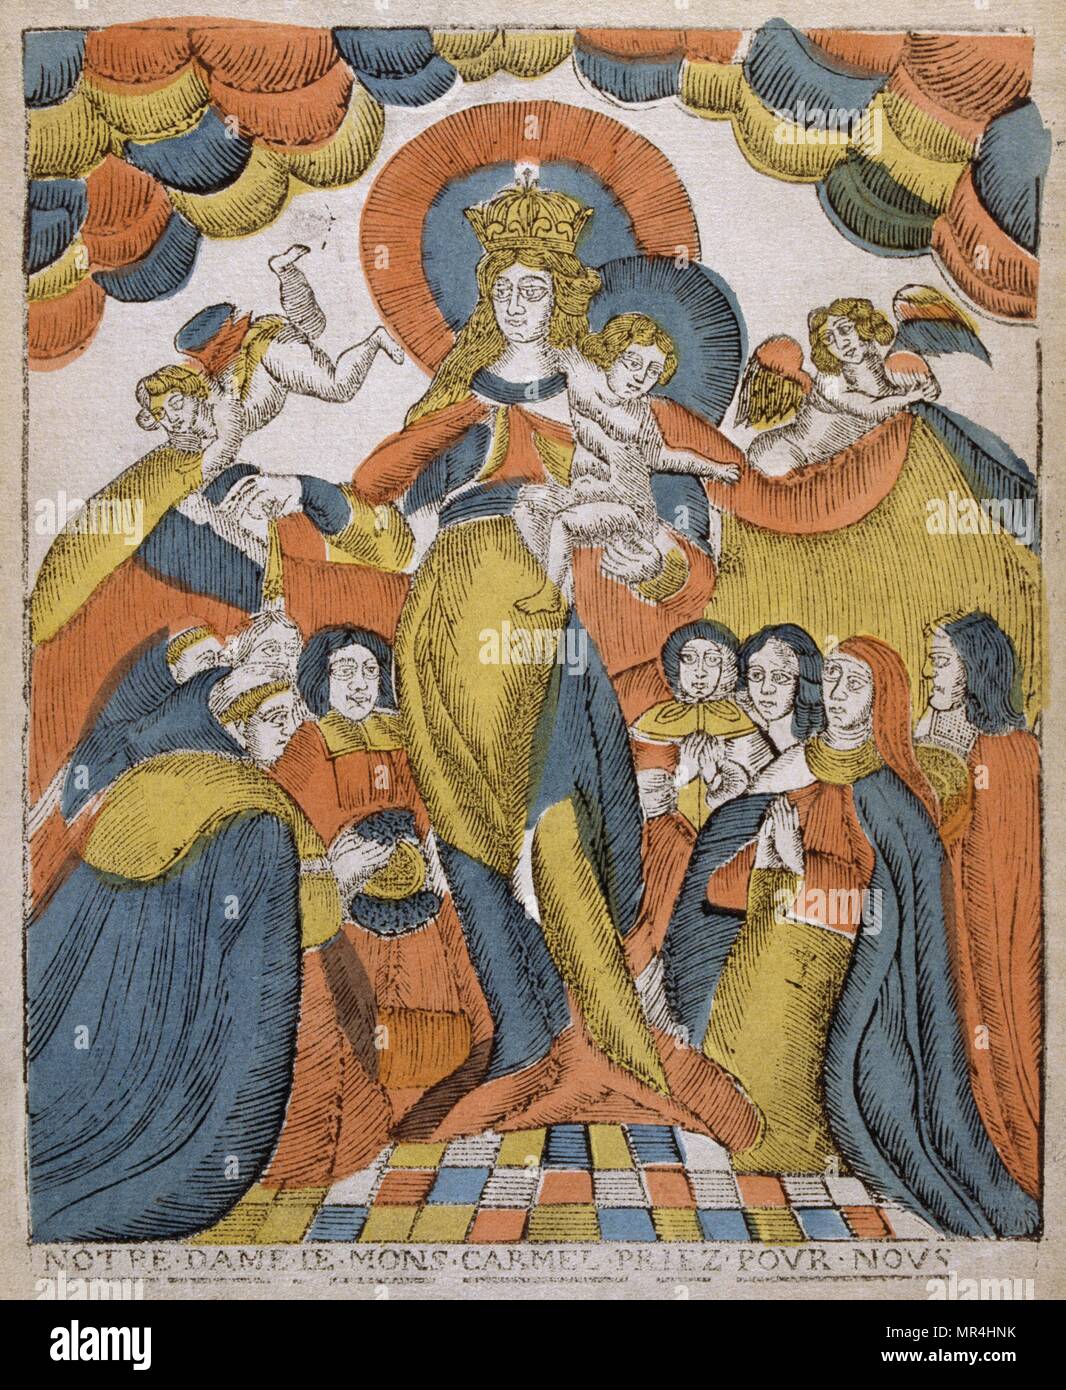 19th century woodcut illustration, showing the coronation of the Virgin Mary  with Jesus. Circa 1810 Stock Photo